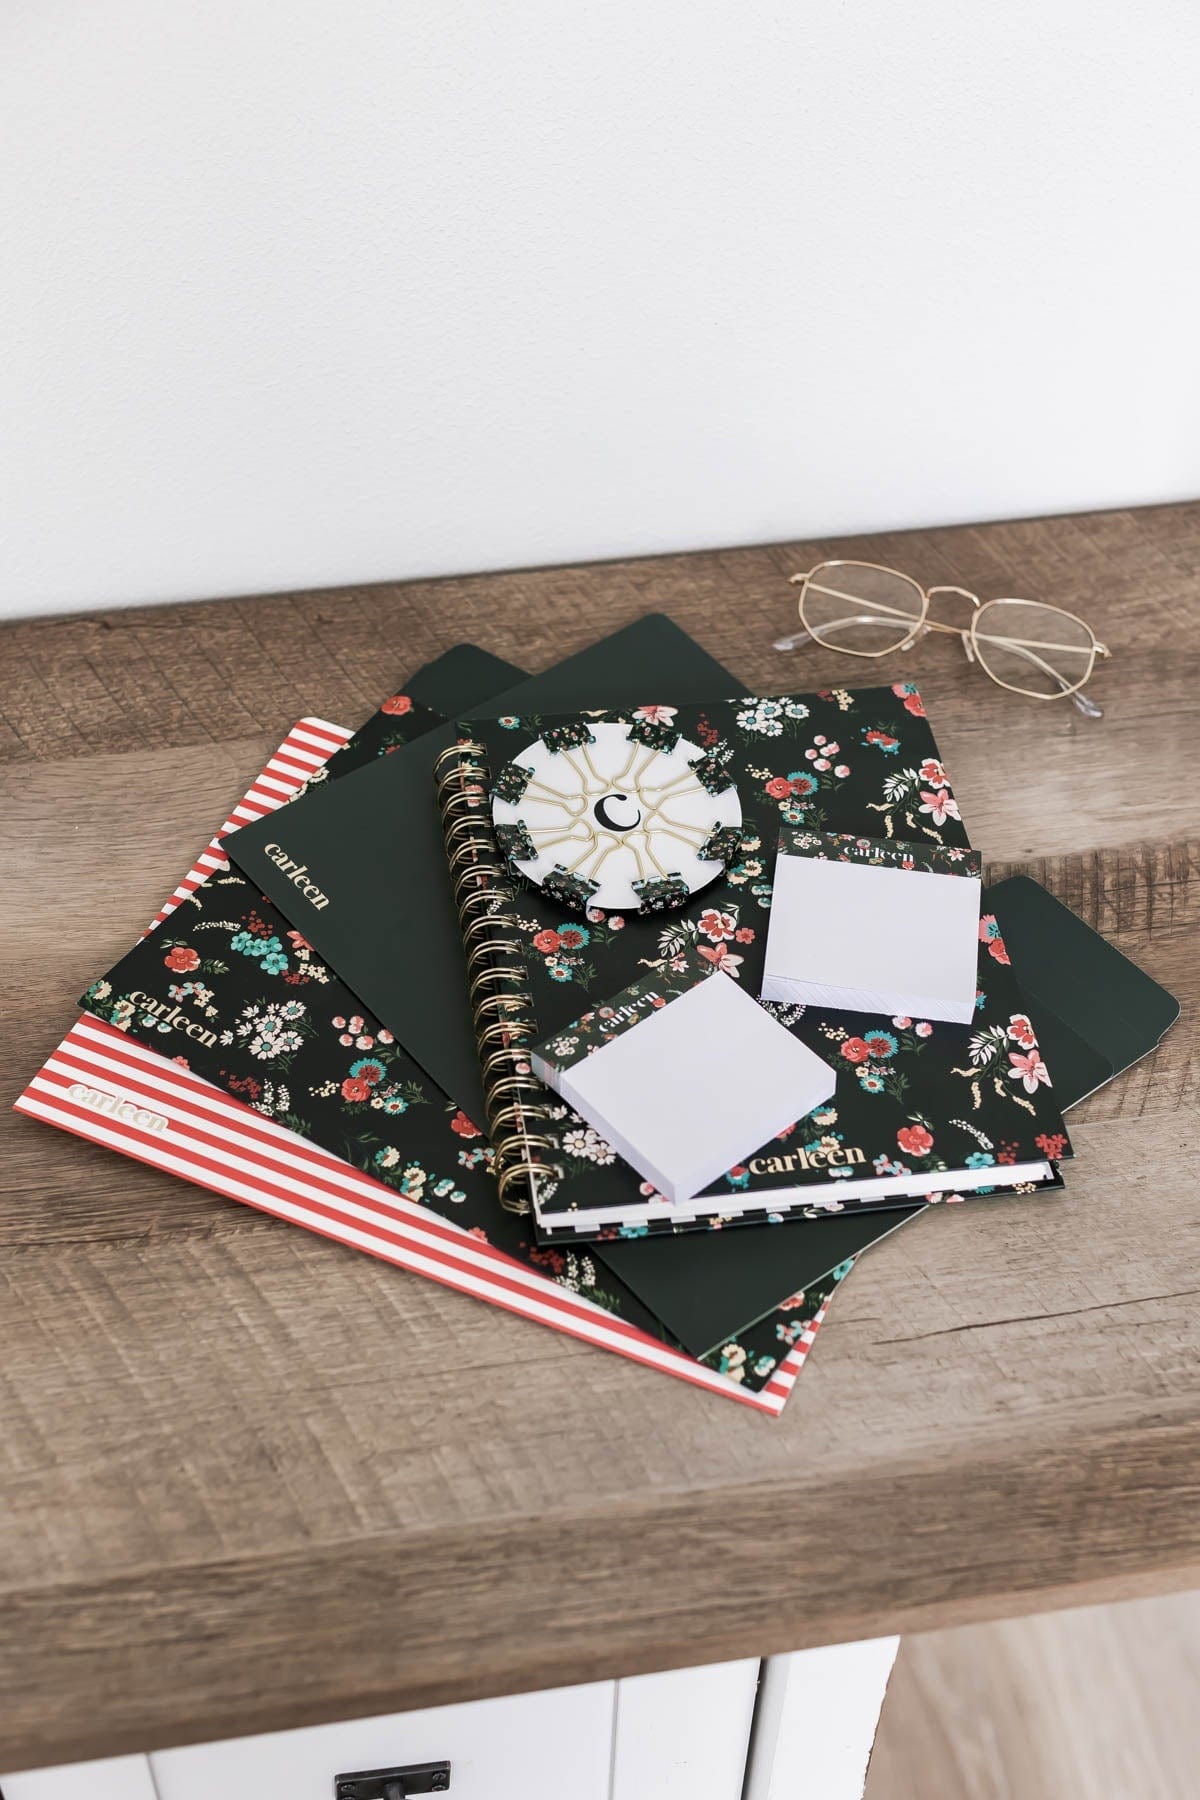 Classic Lined Journal Notebook - Floral Print